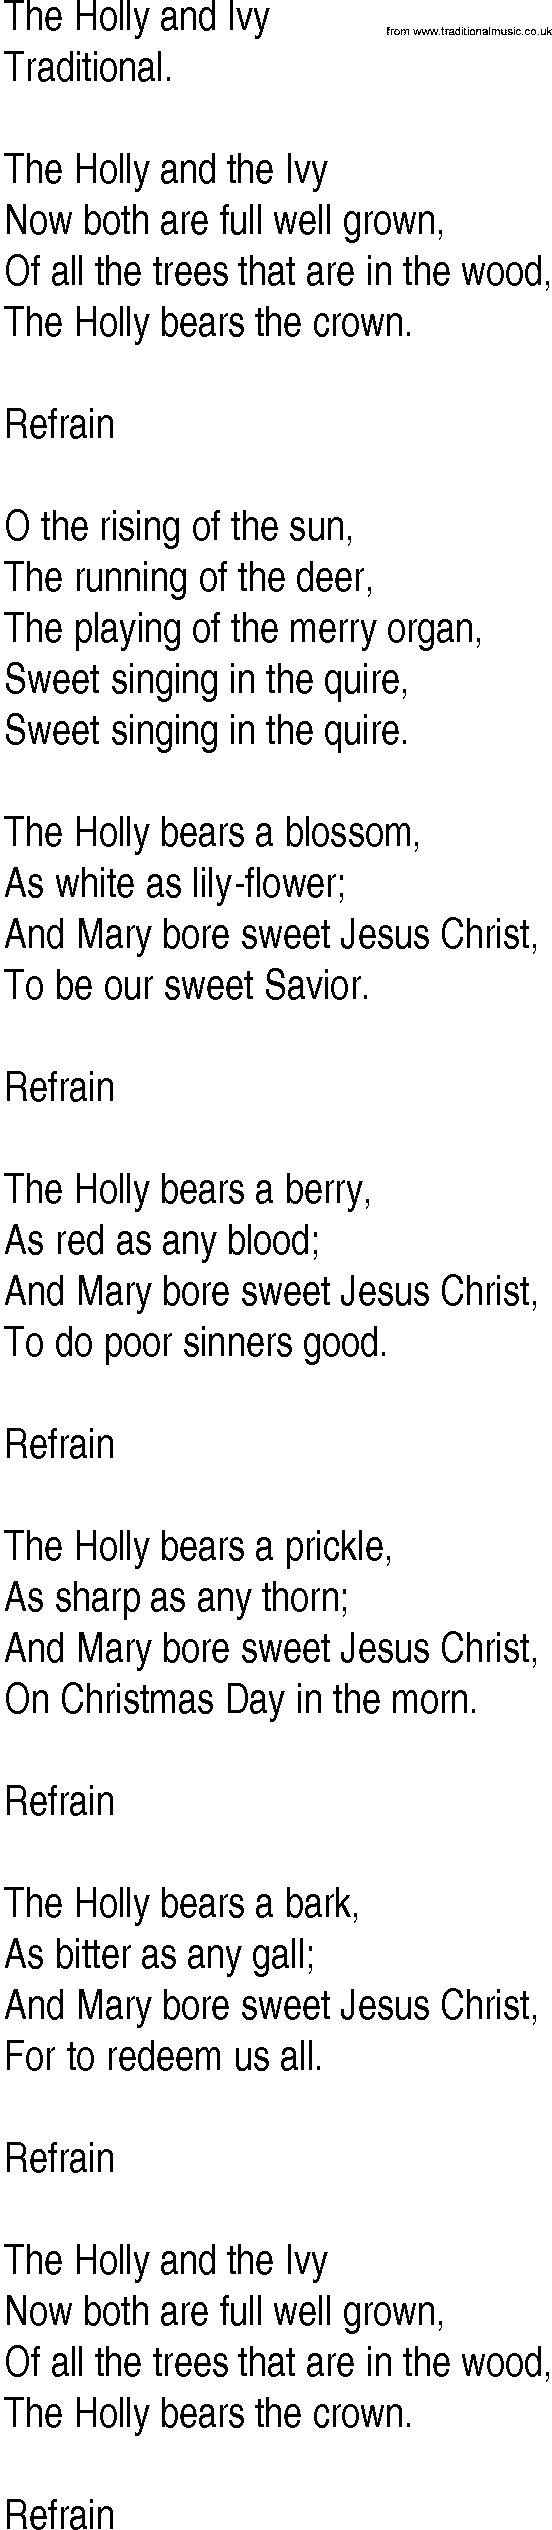 Hymn and Gospel Song: The Holly and Ivy by Traditional lyrics